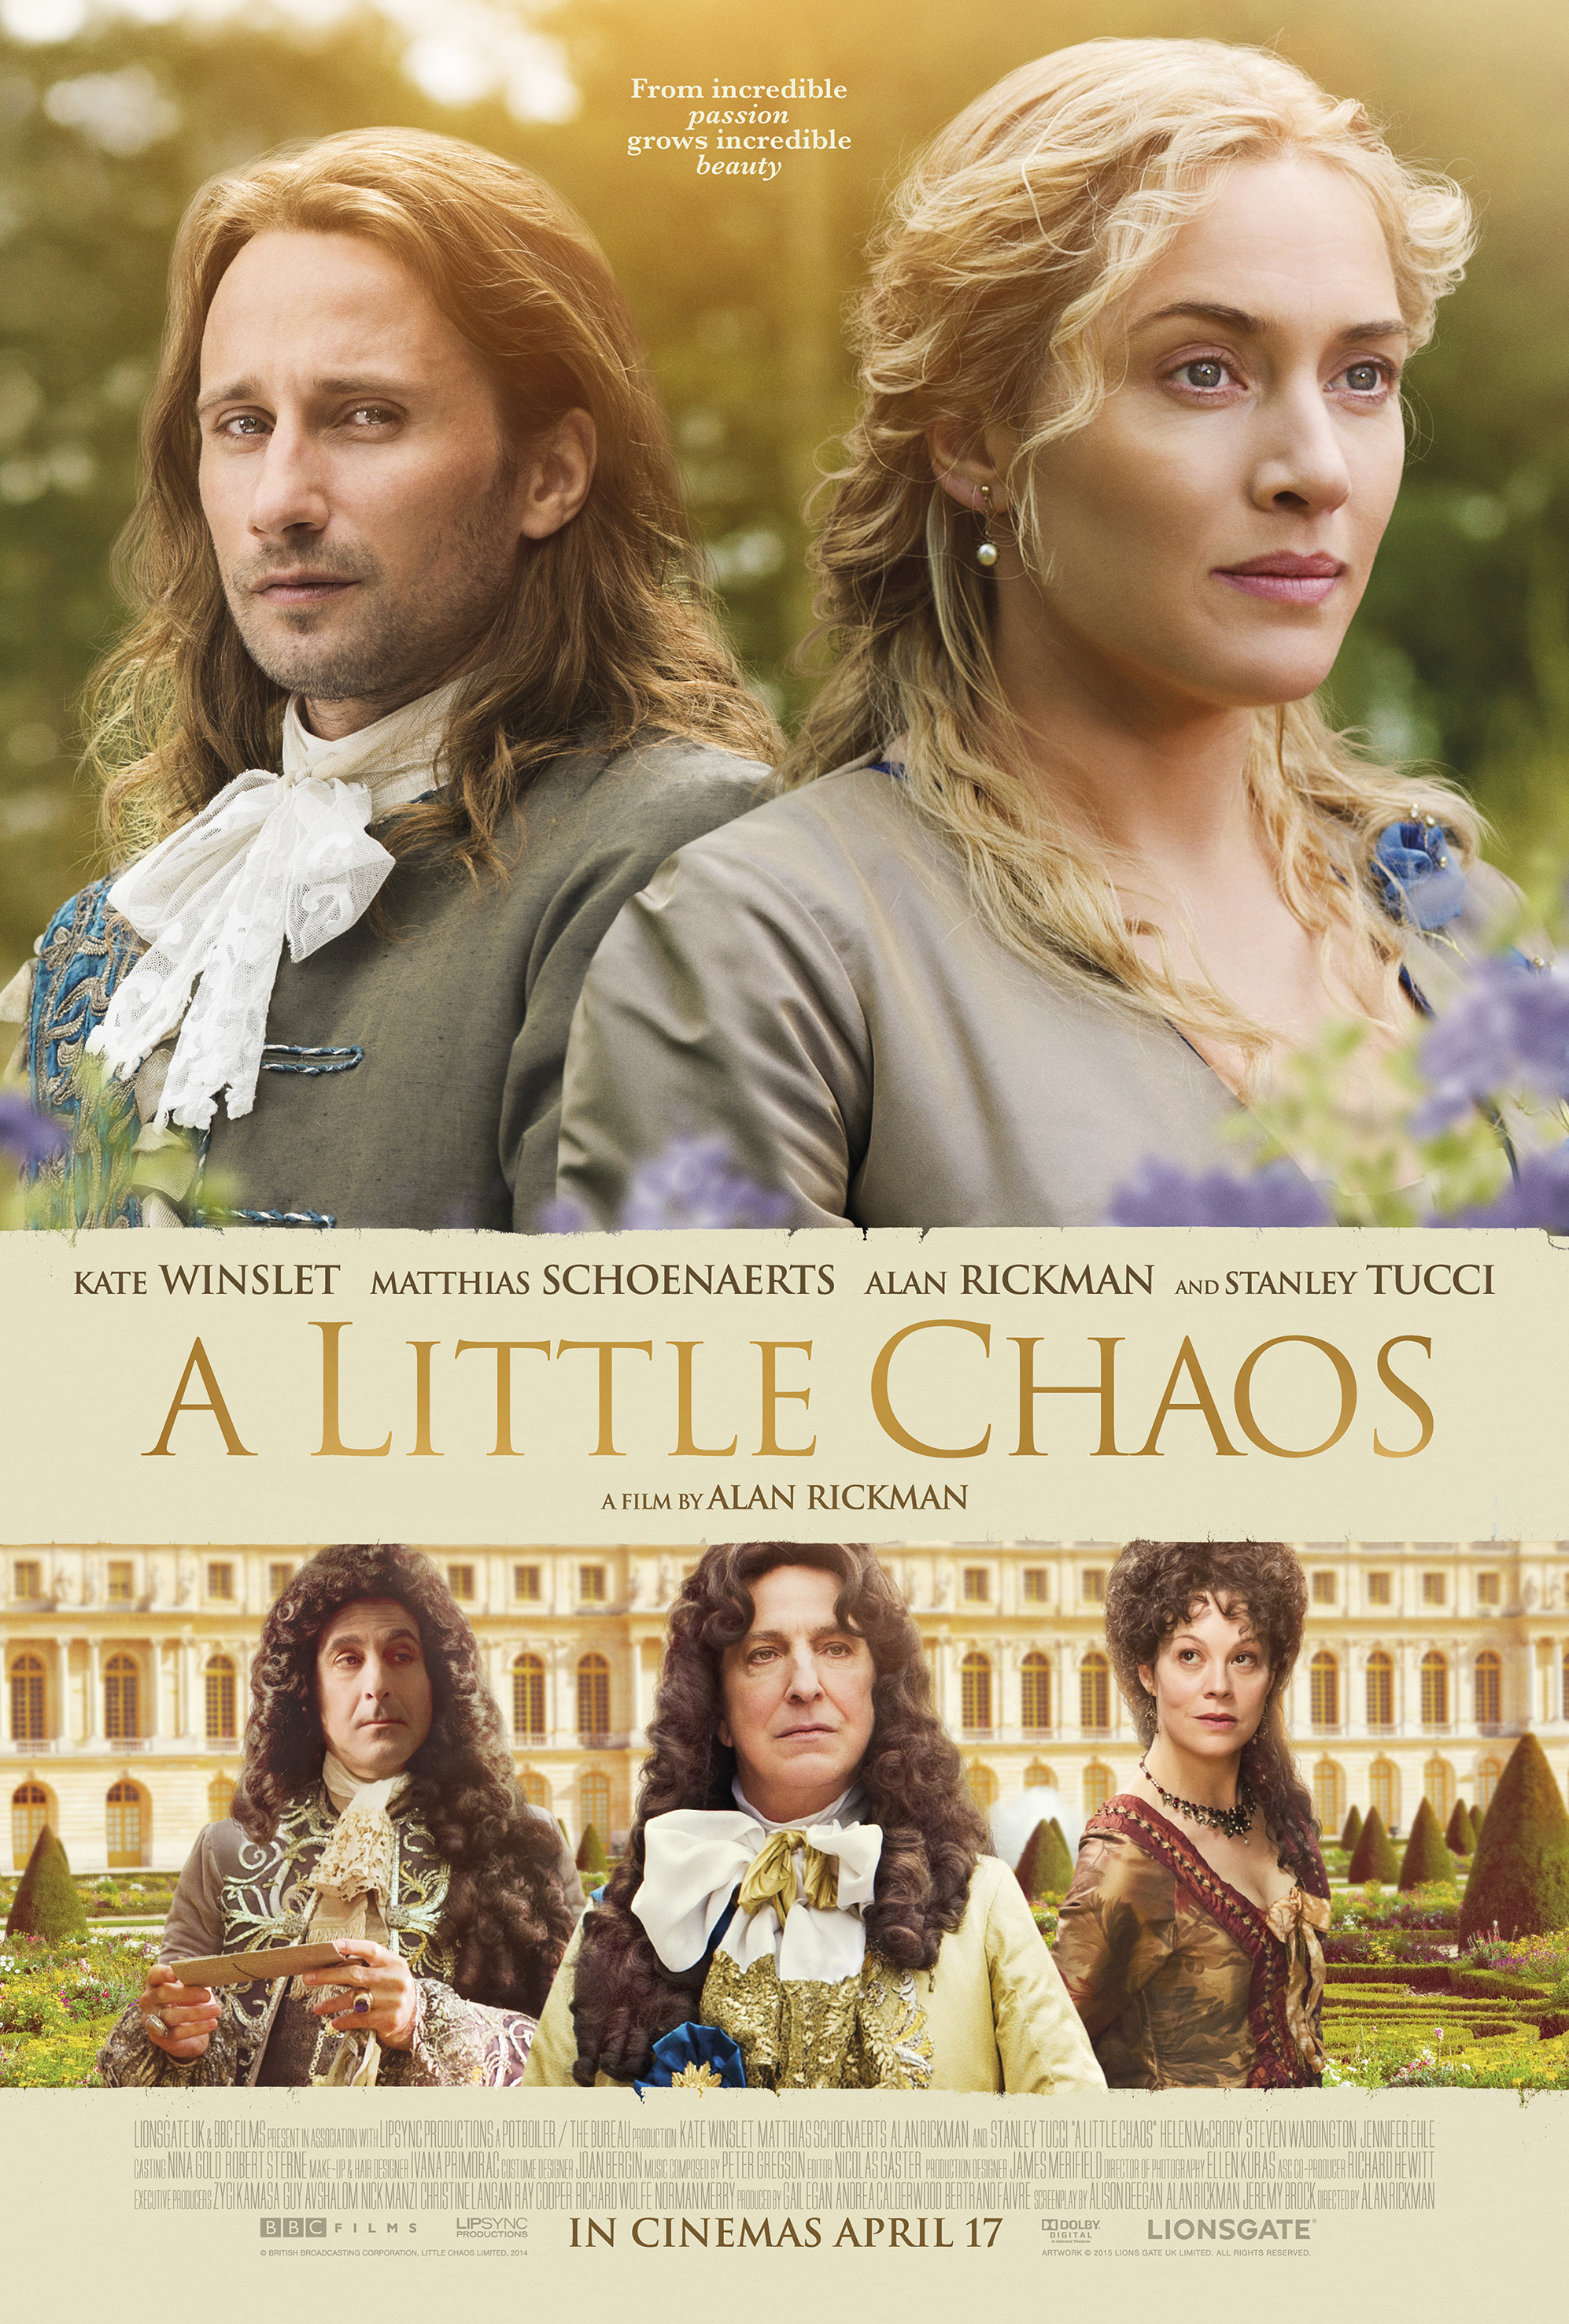 Alan Rickman, Kate Winslet, Stanley Tucci and Matthias Schoenaerts in A Little Chaos (2014)